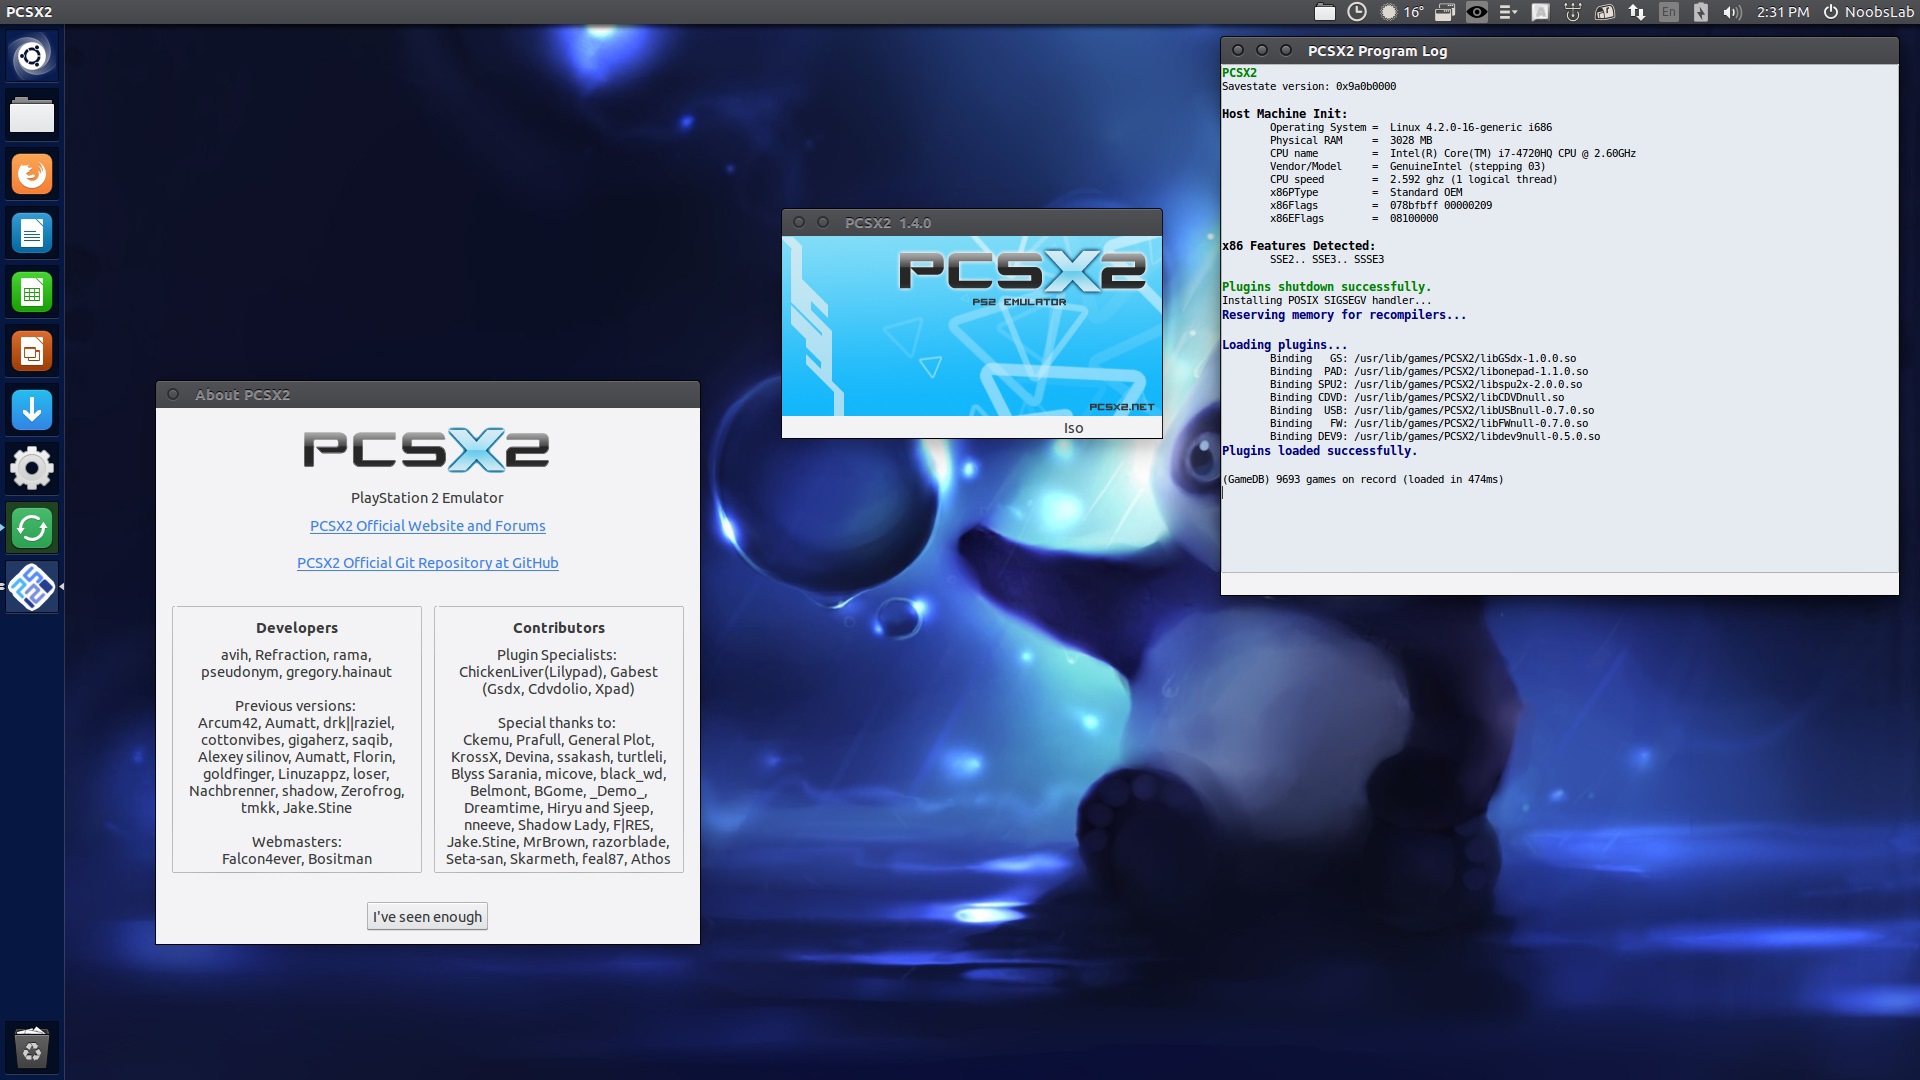 How To Use Cheat Codes On PCSX2 Emulator